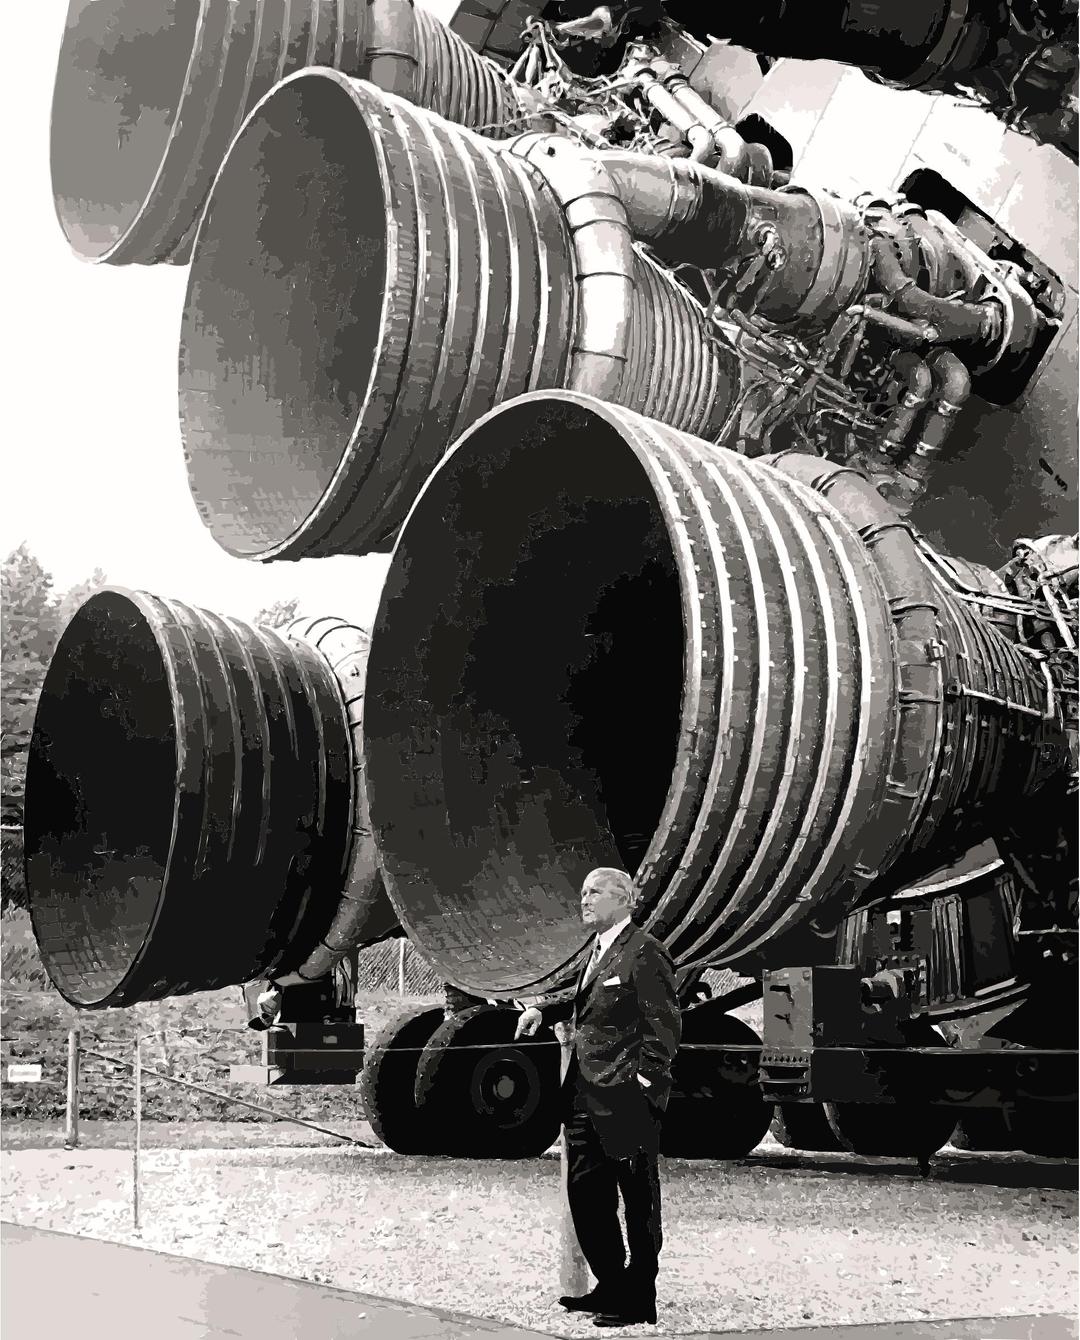 S-IC engines and Von Braun png transparent